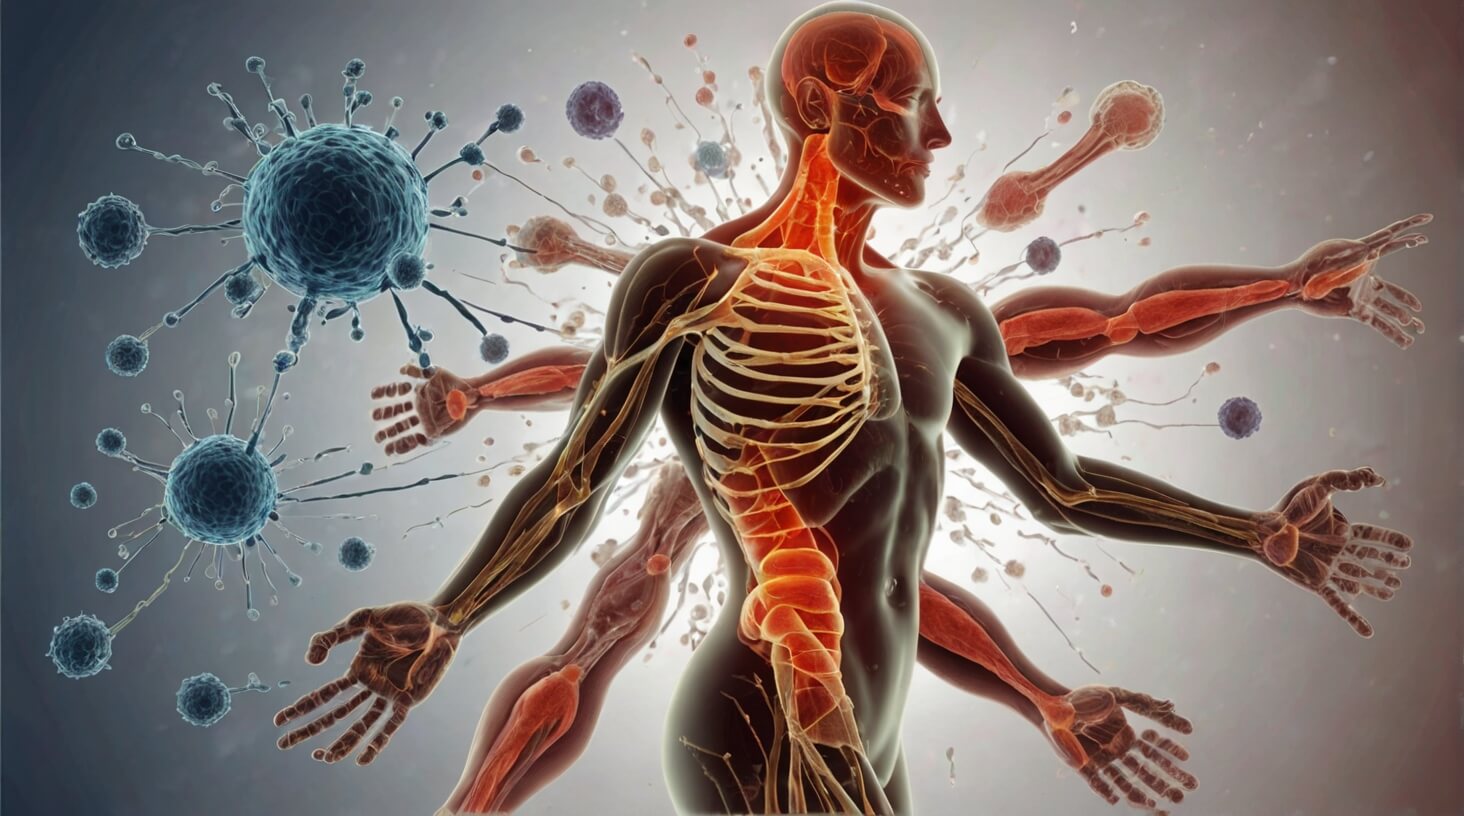 Image depicting various immune response and stress management techniques to enhance well-being.